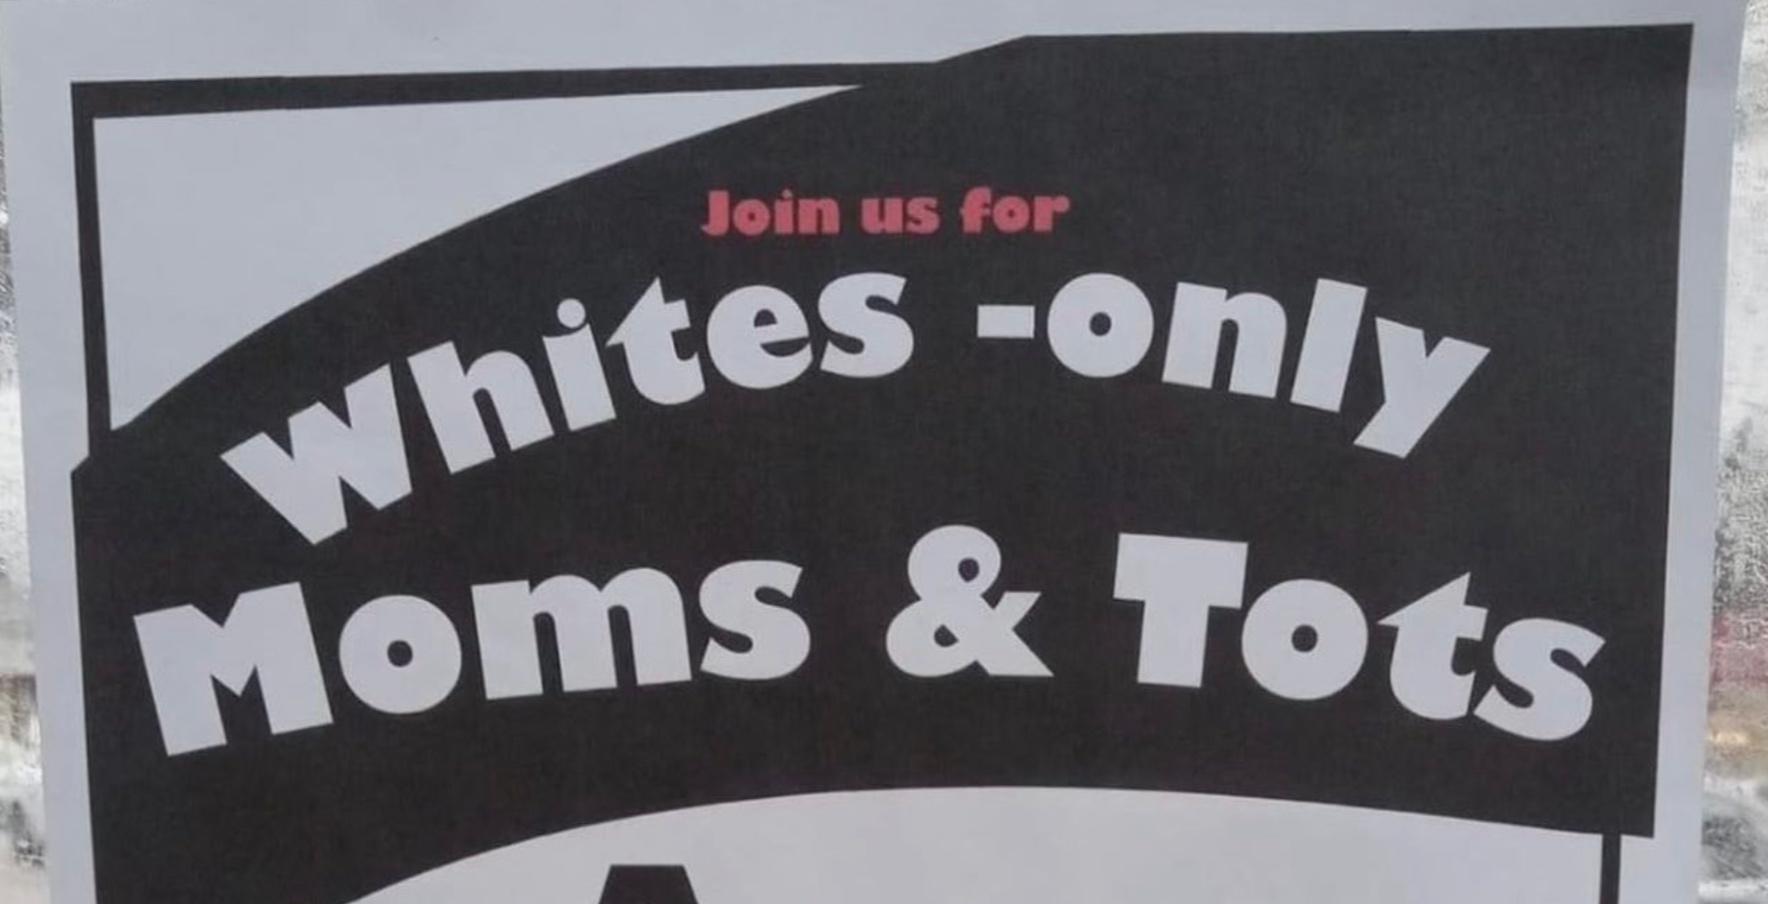 Whites-only Moms and Tots sign